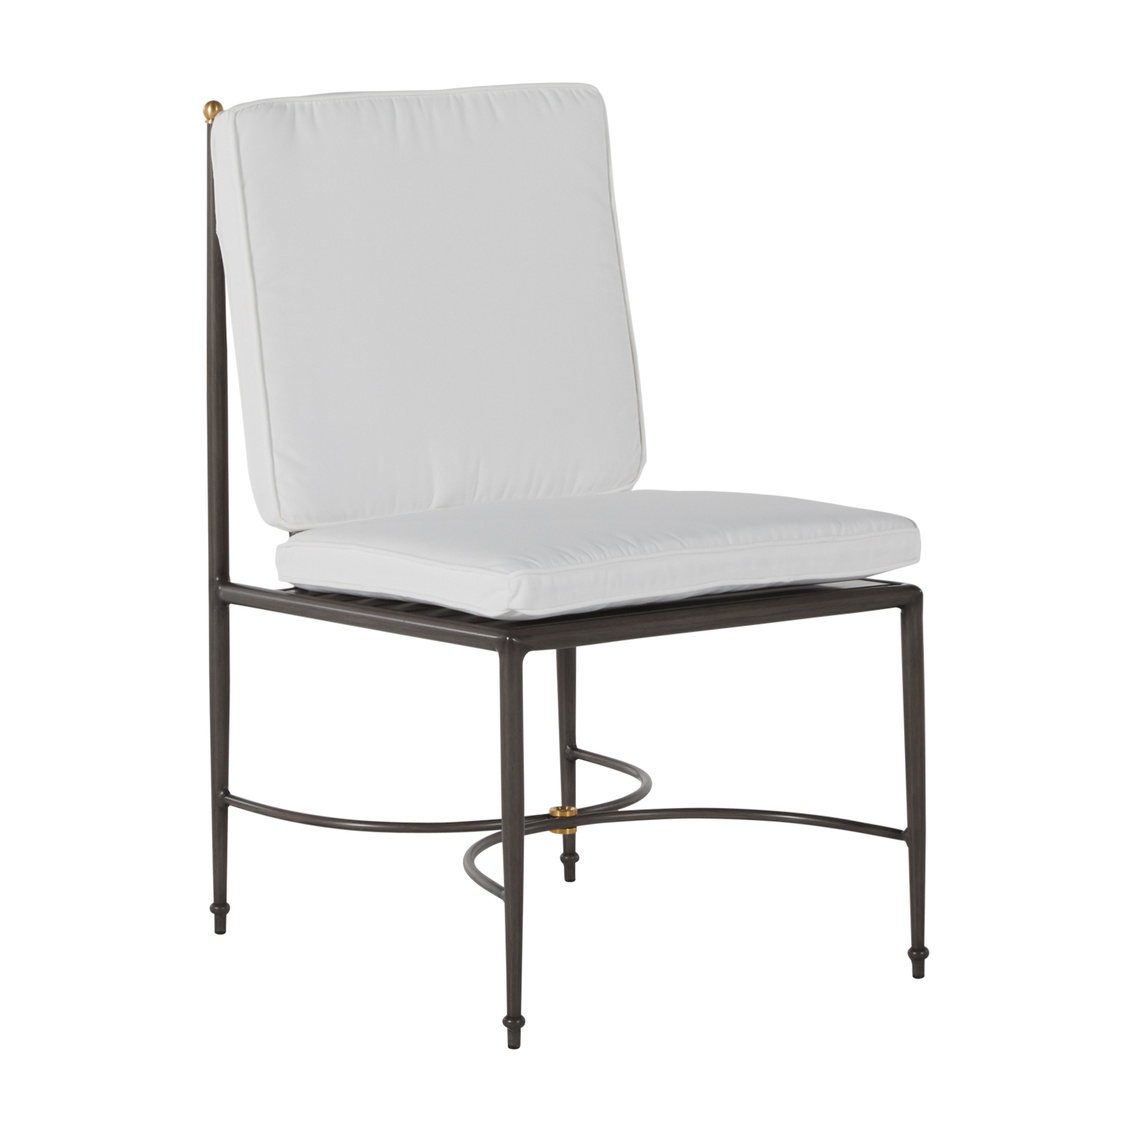 roma side chair in slate grey – frame only product image